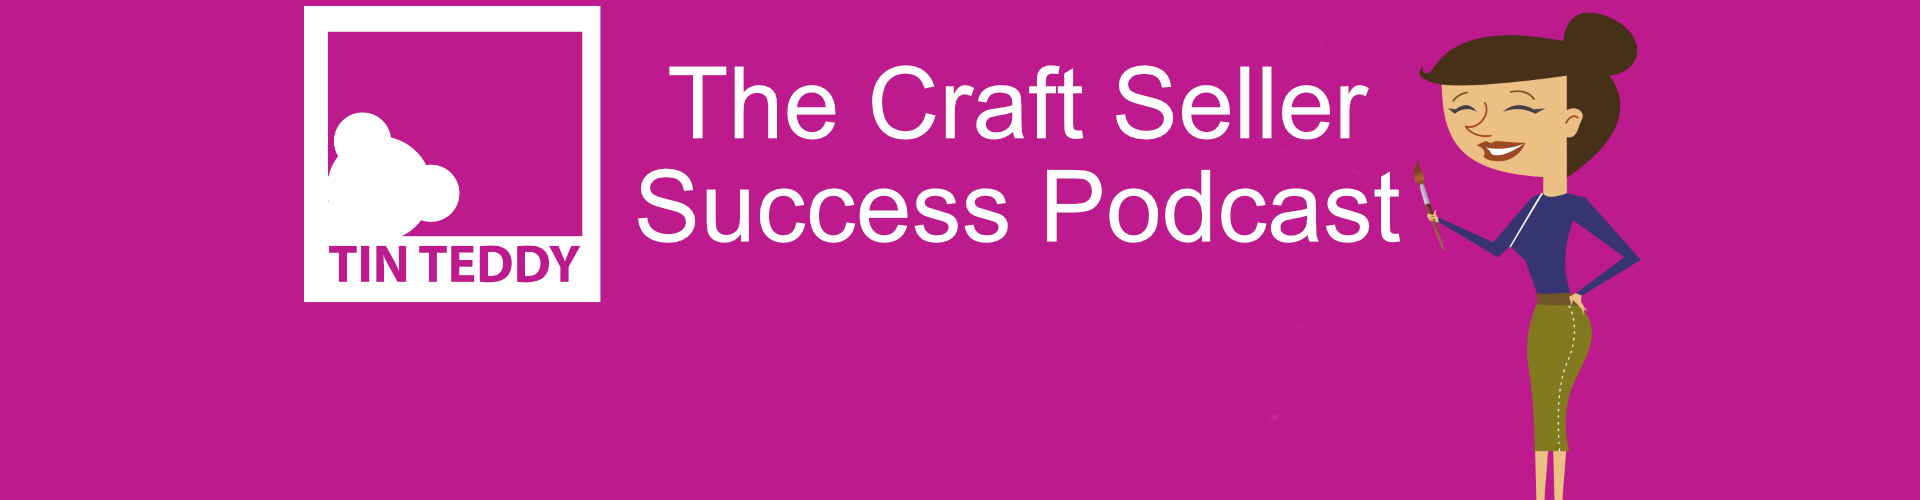 The Craft Seller Success Podcast